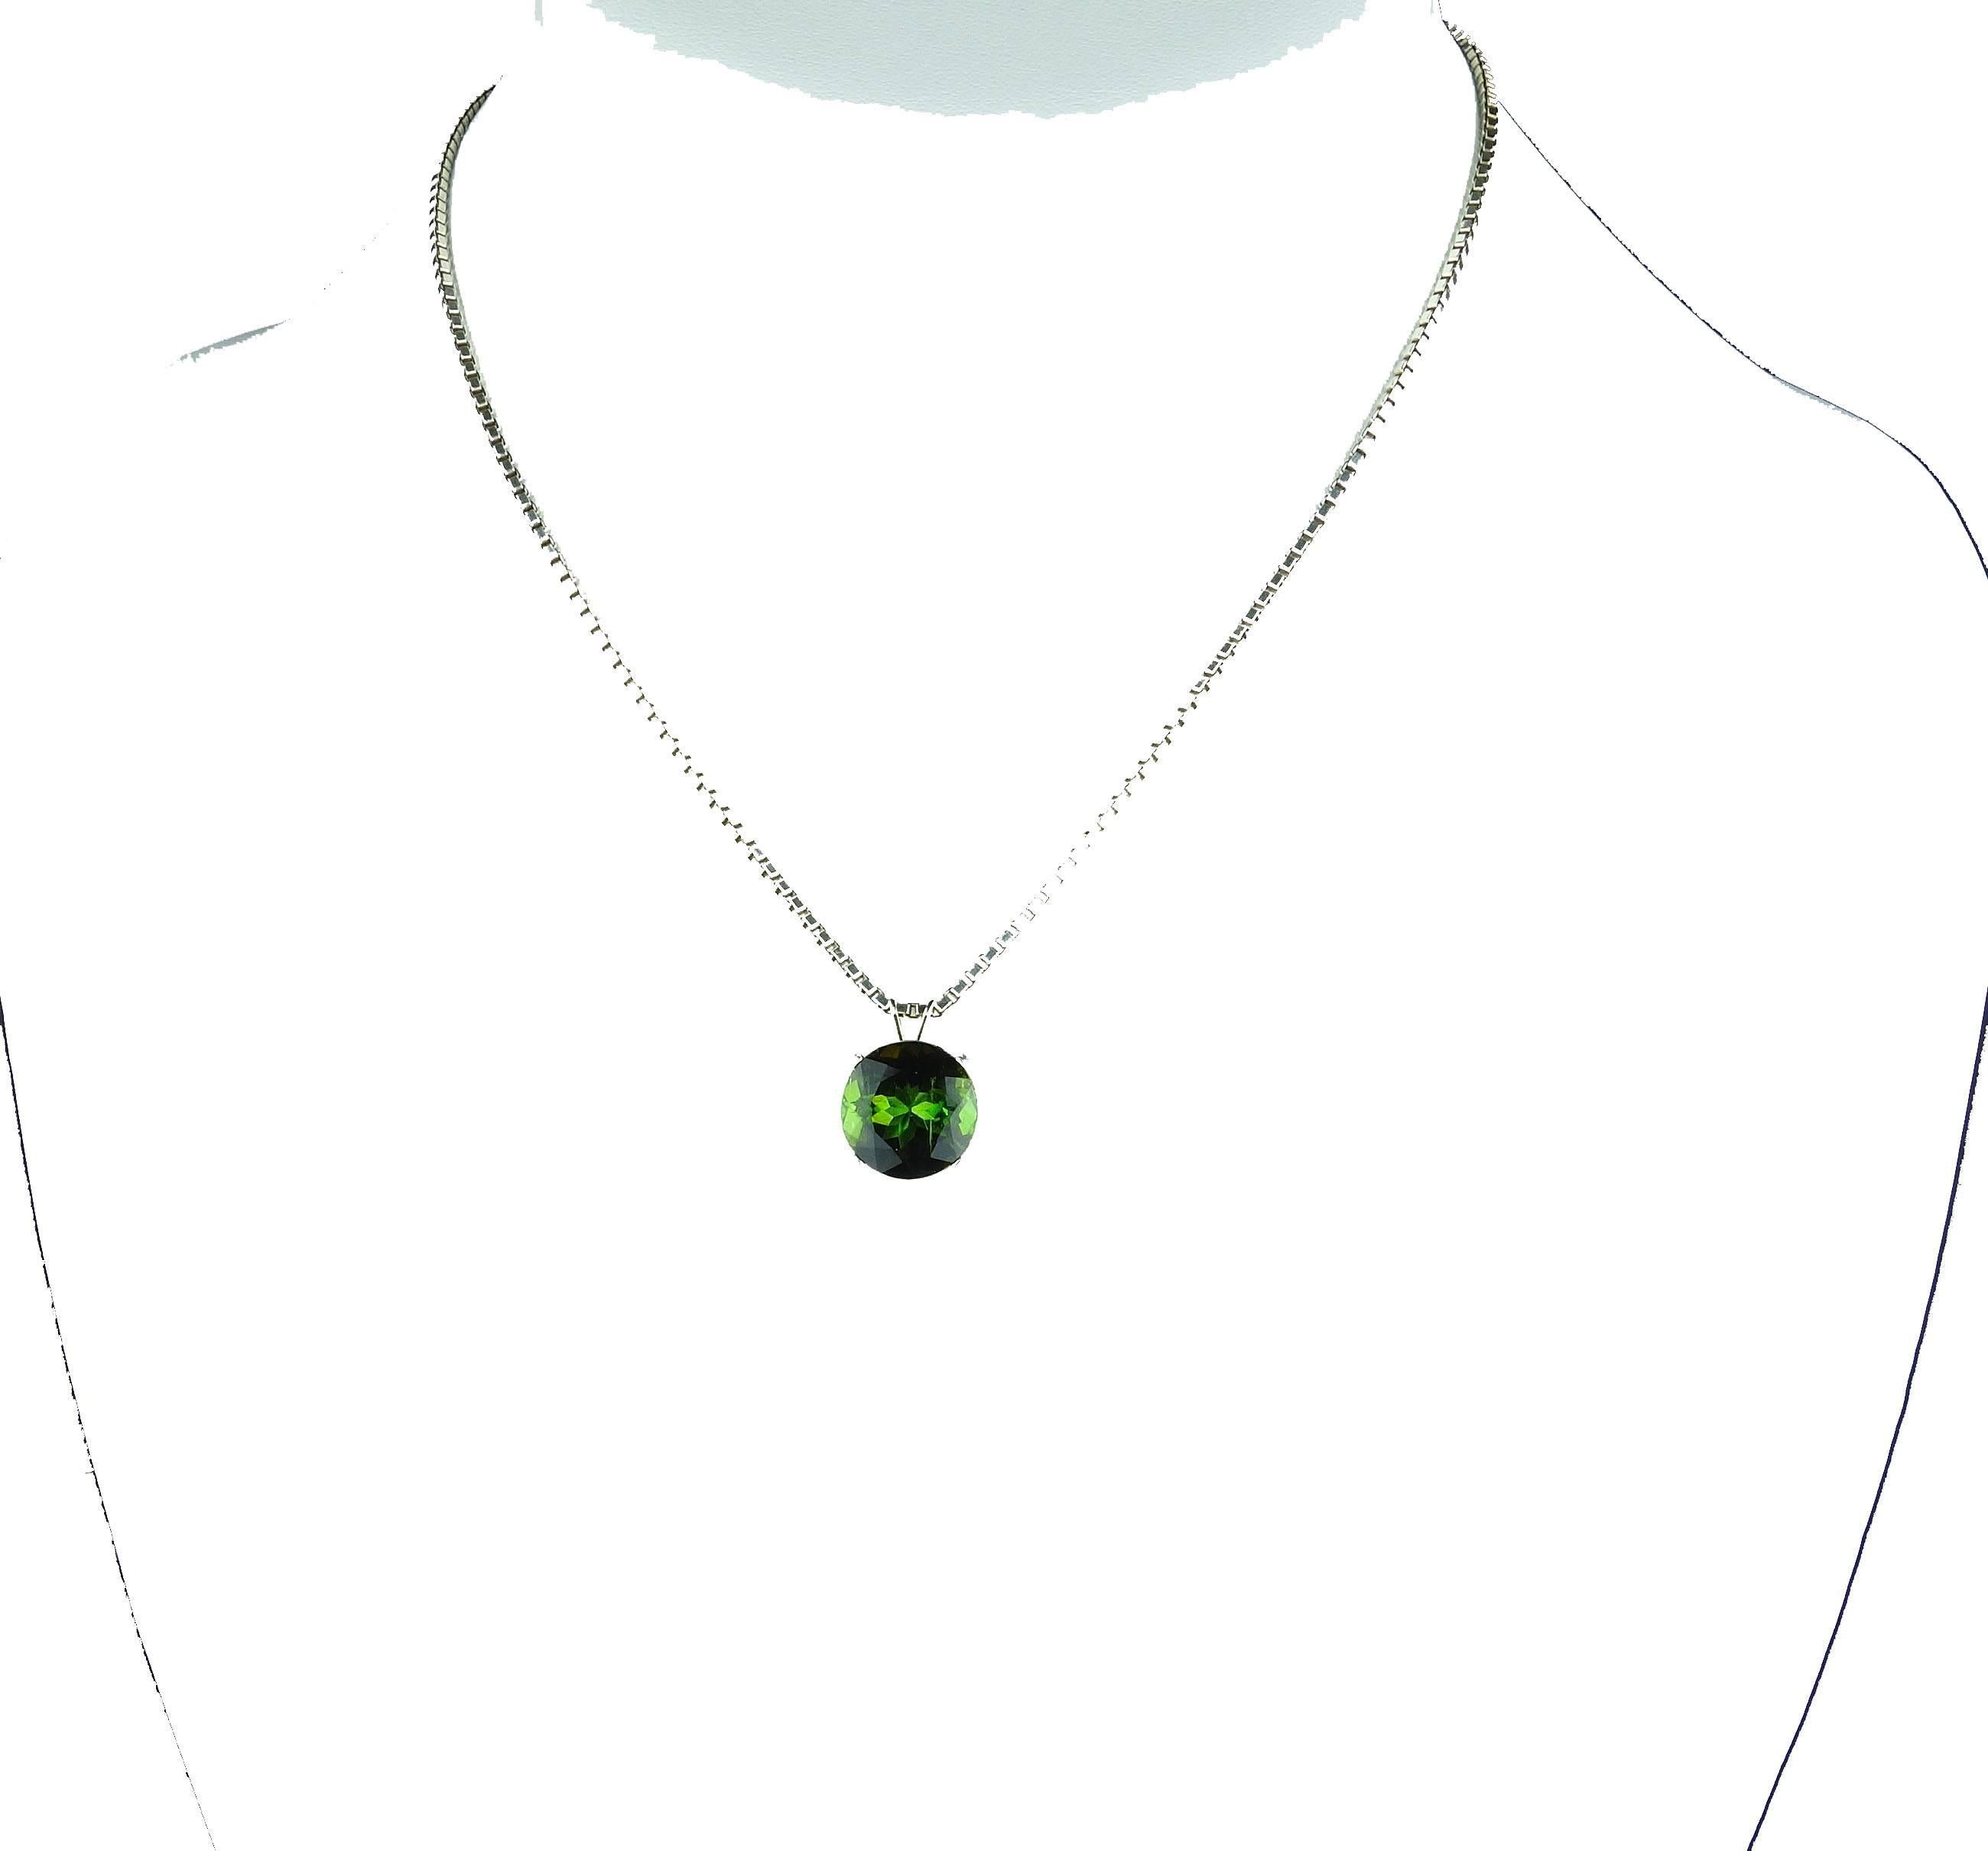 This gorgeous bright real green 5 carat natural Tourmaline is set in a sterling silver pendant.  The gemstone is 11.3 mm across.  This is a beautiful and rare green color and sparkles when dangling around your neck.  